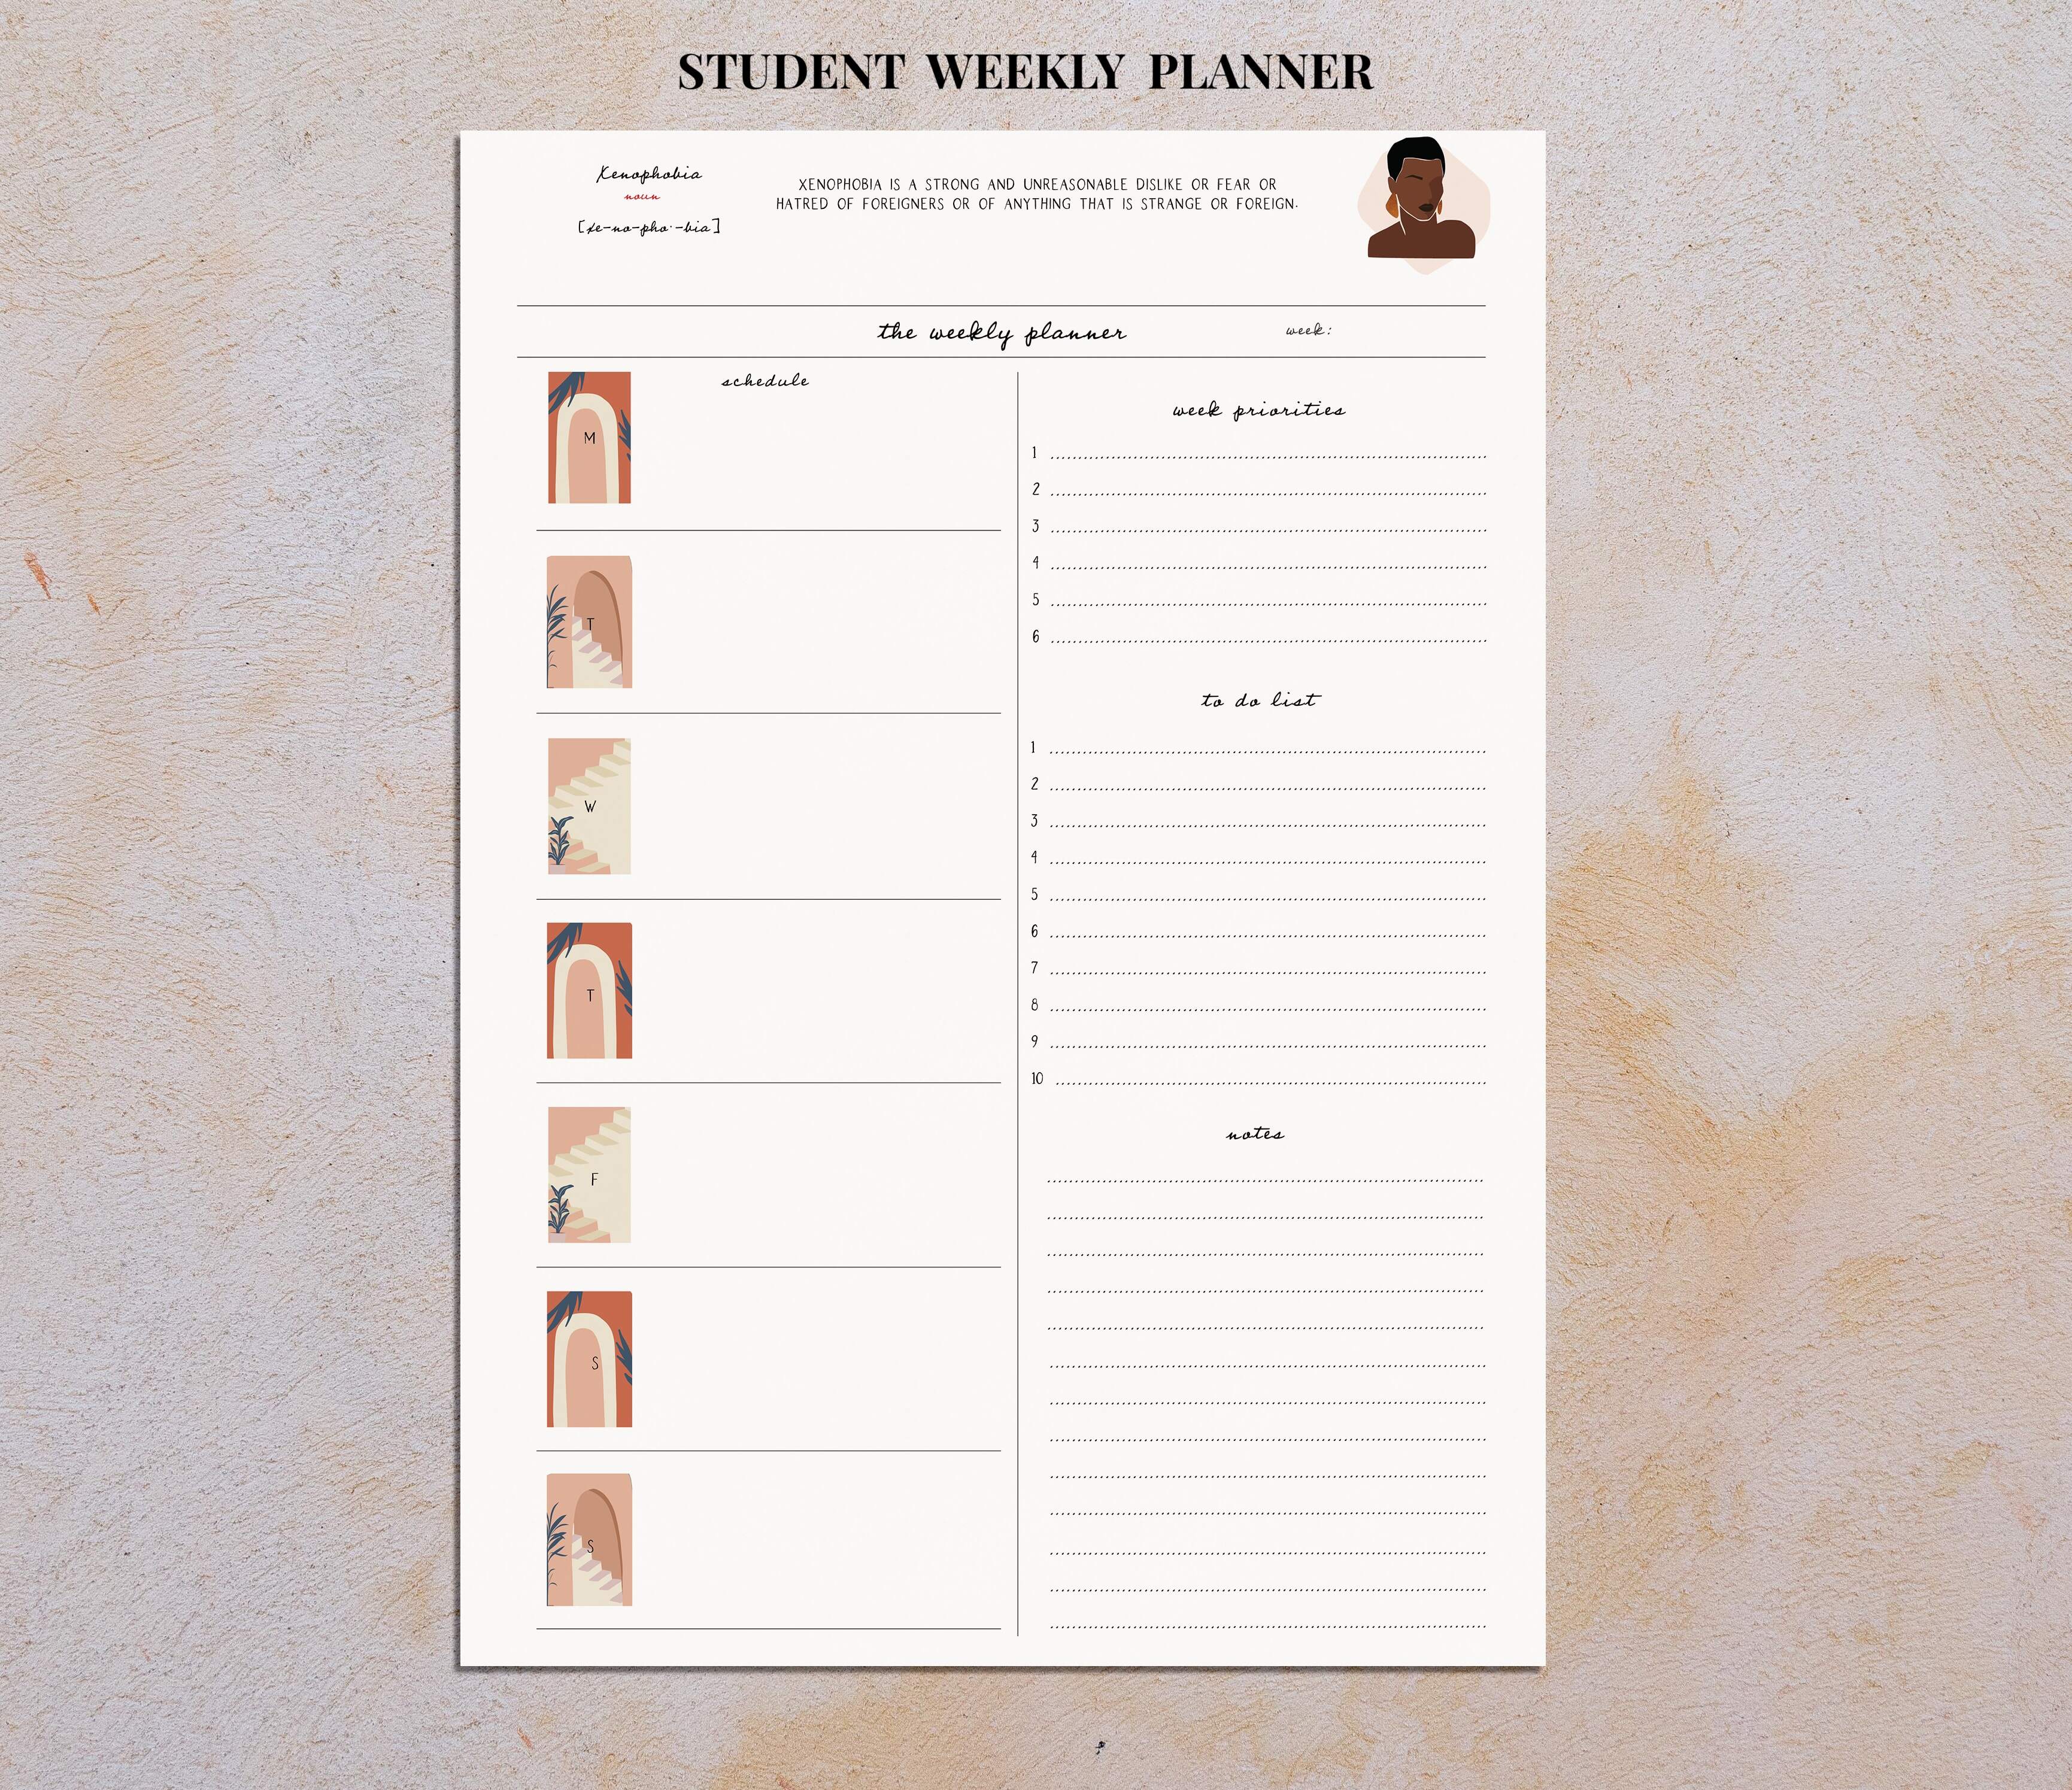 Student | The weekly planner